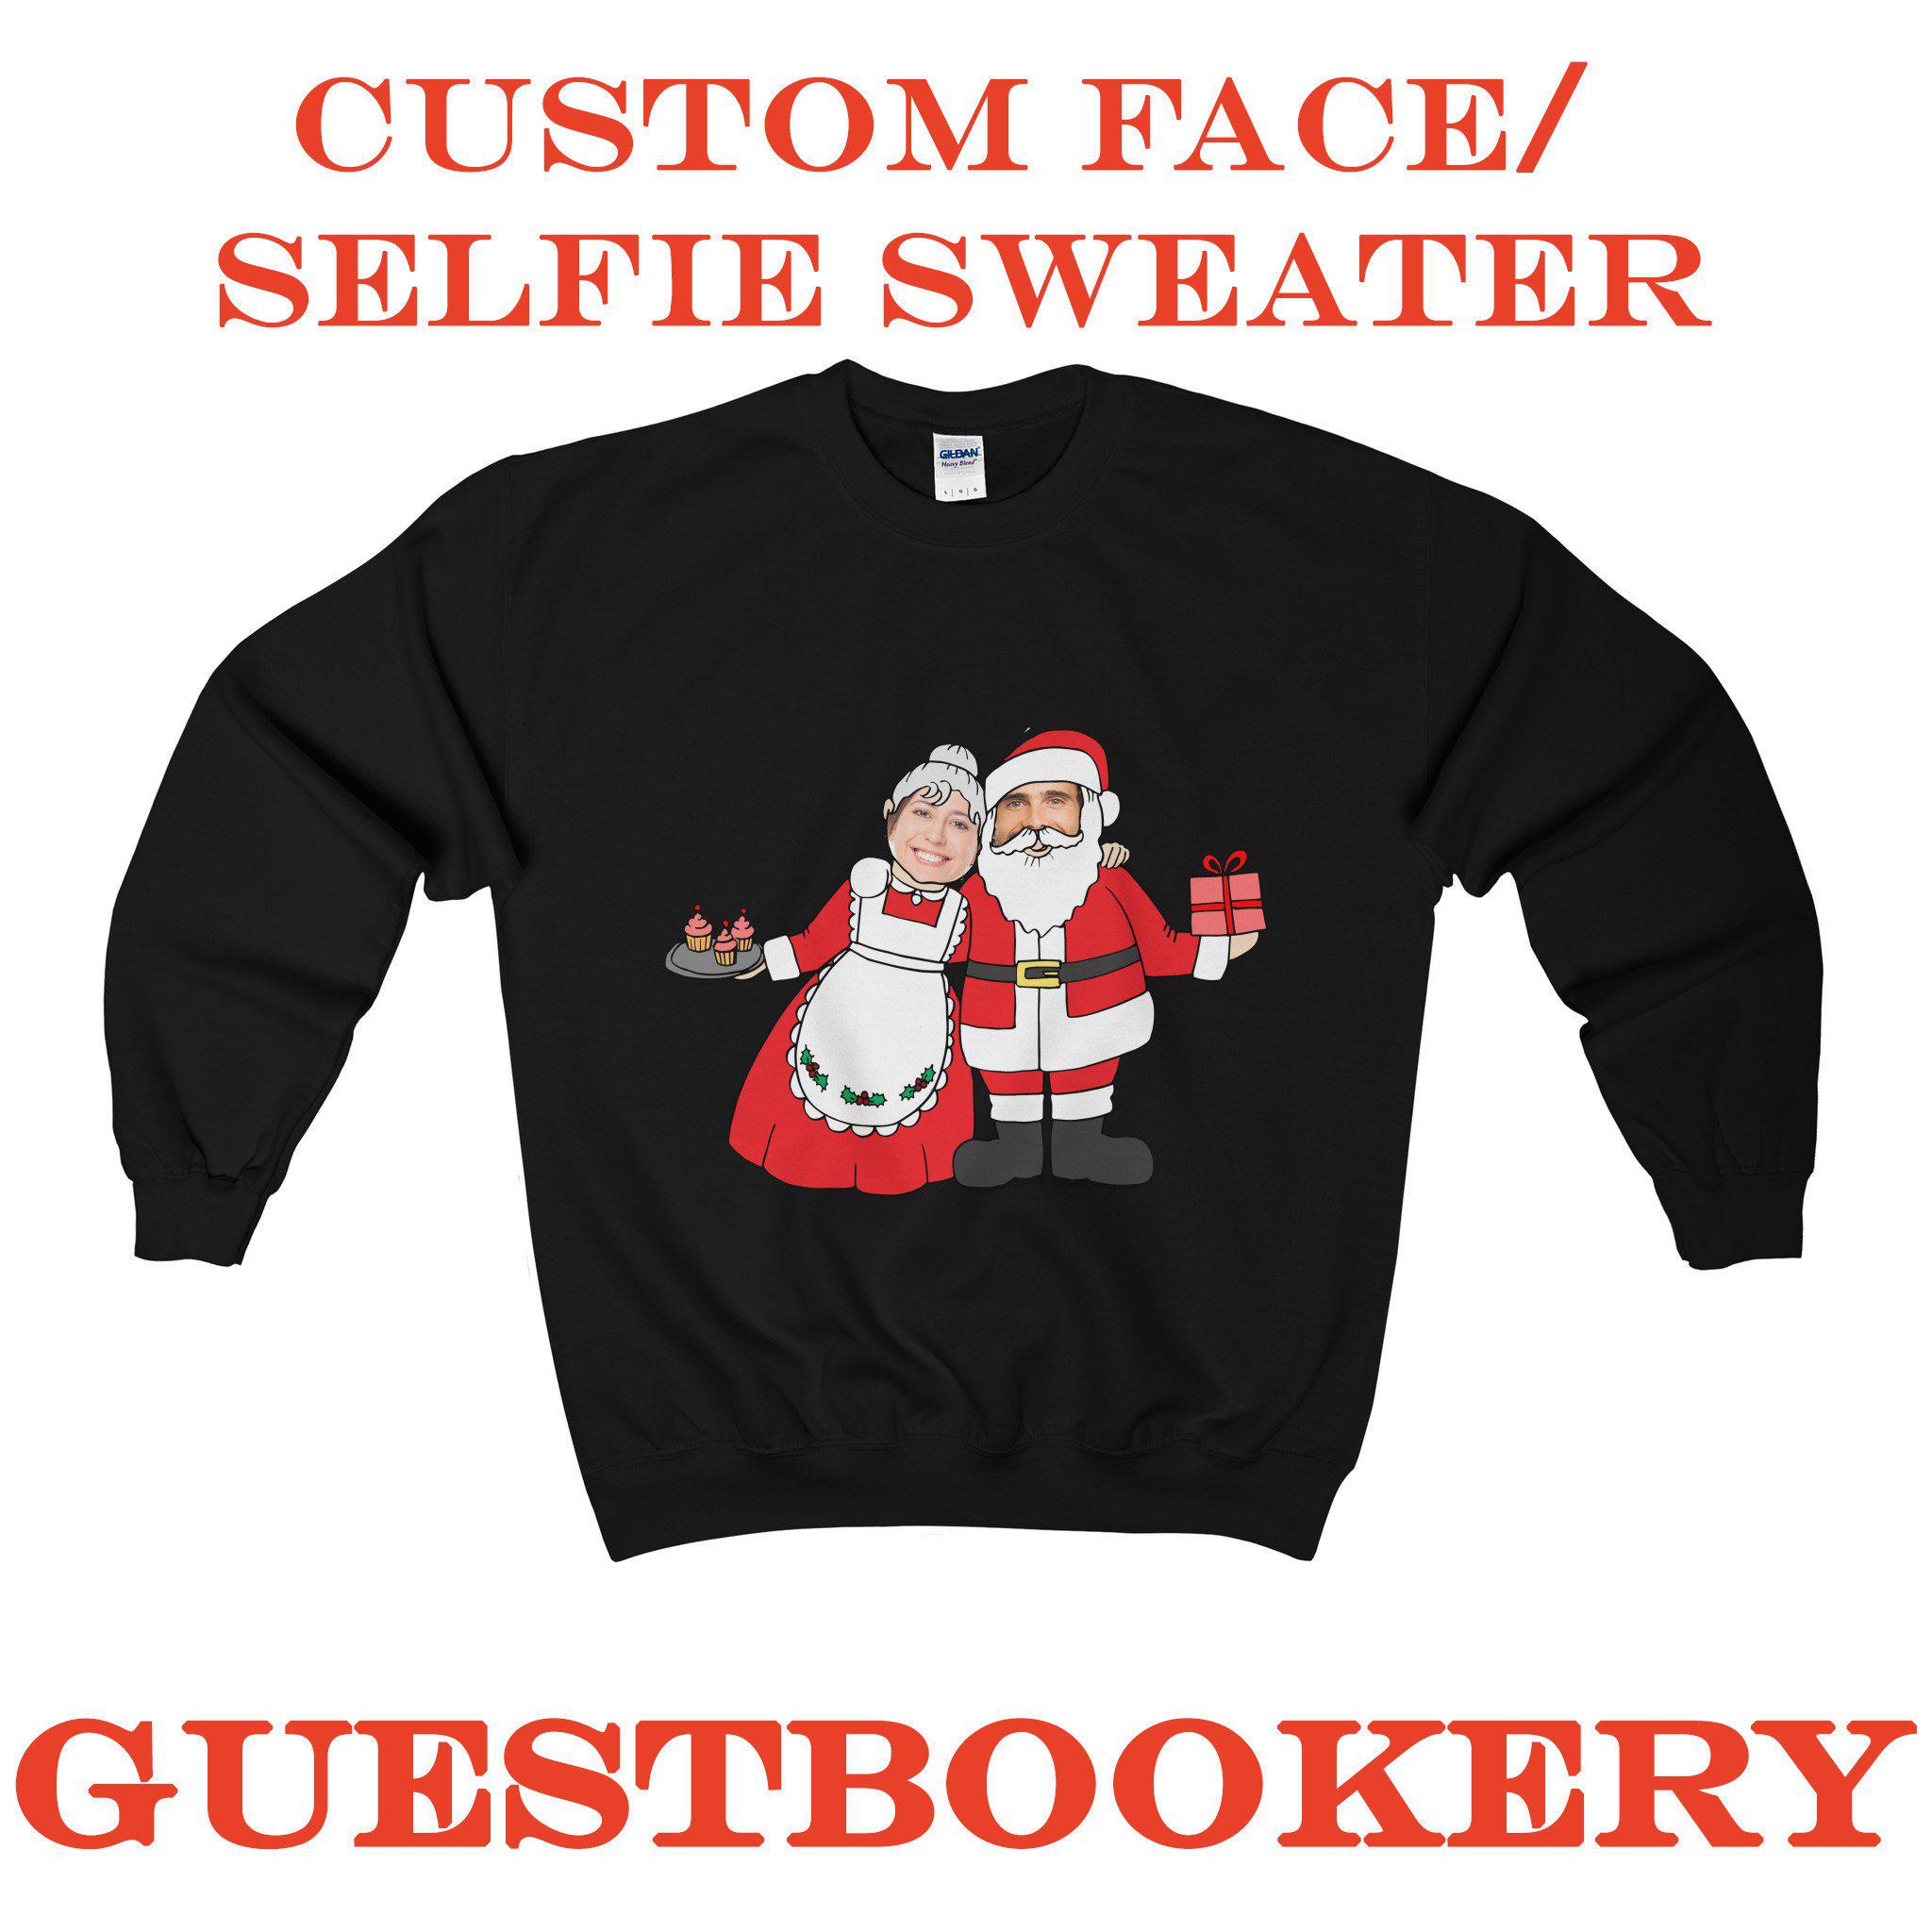 Custom Face Ugly Christmas Mr. & Mrs. Claus Sweatshirt - Guestbookery